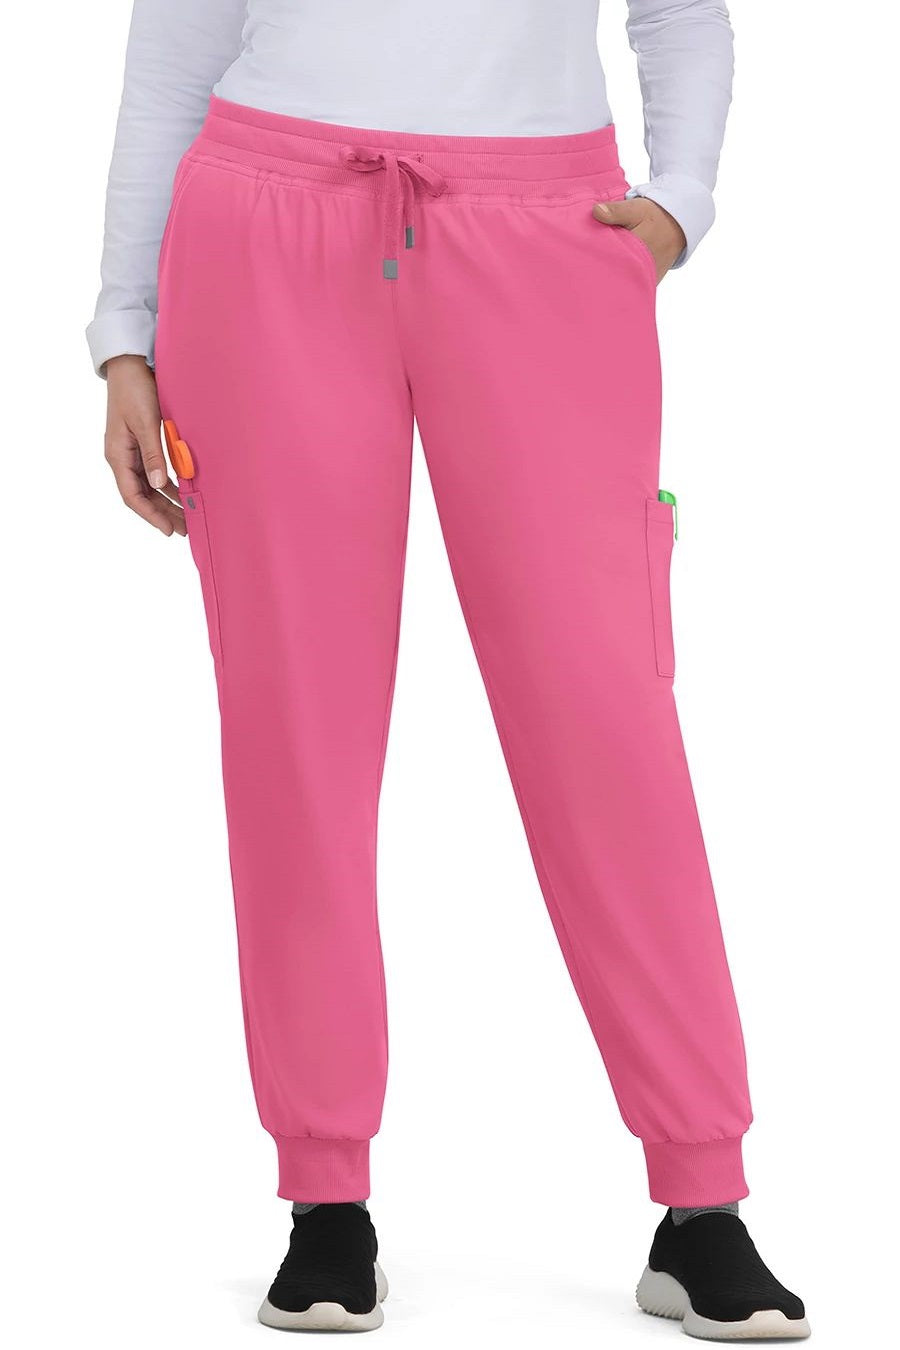 koi Scrub Pants Cureology Pulse Petite Jogger in Carnation at Parker's Clothing and Shoes.